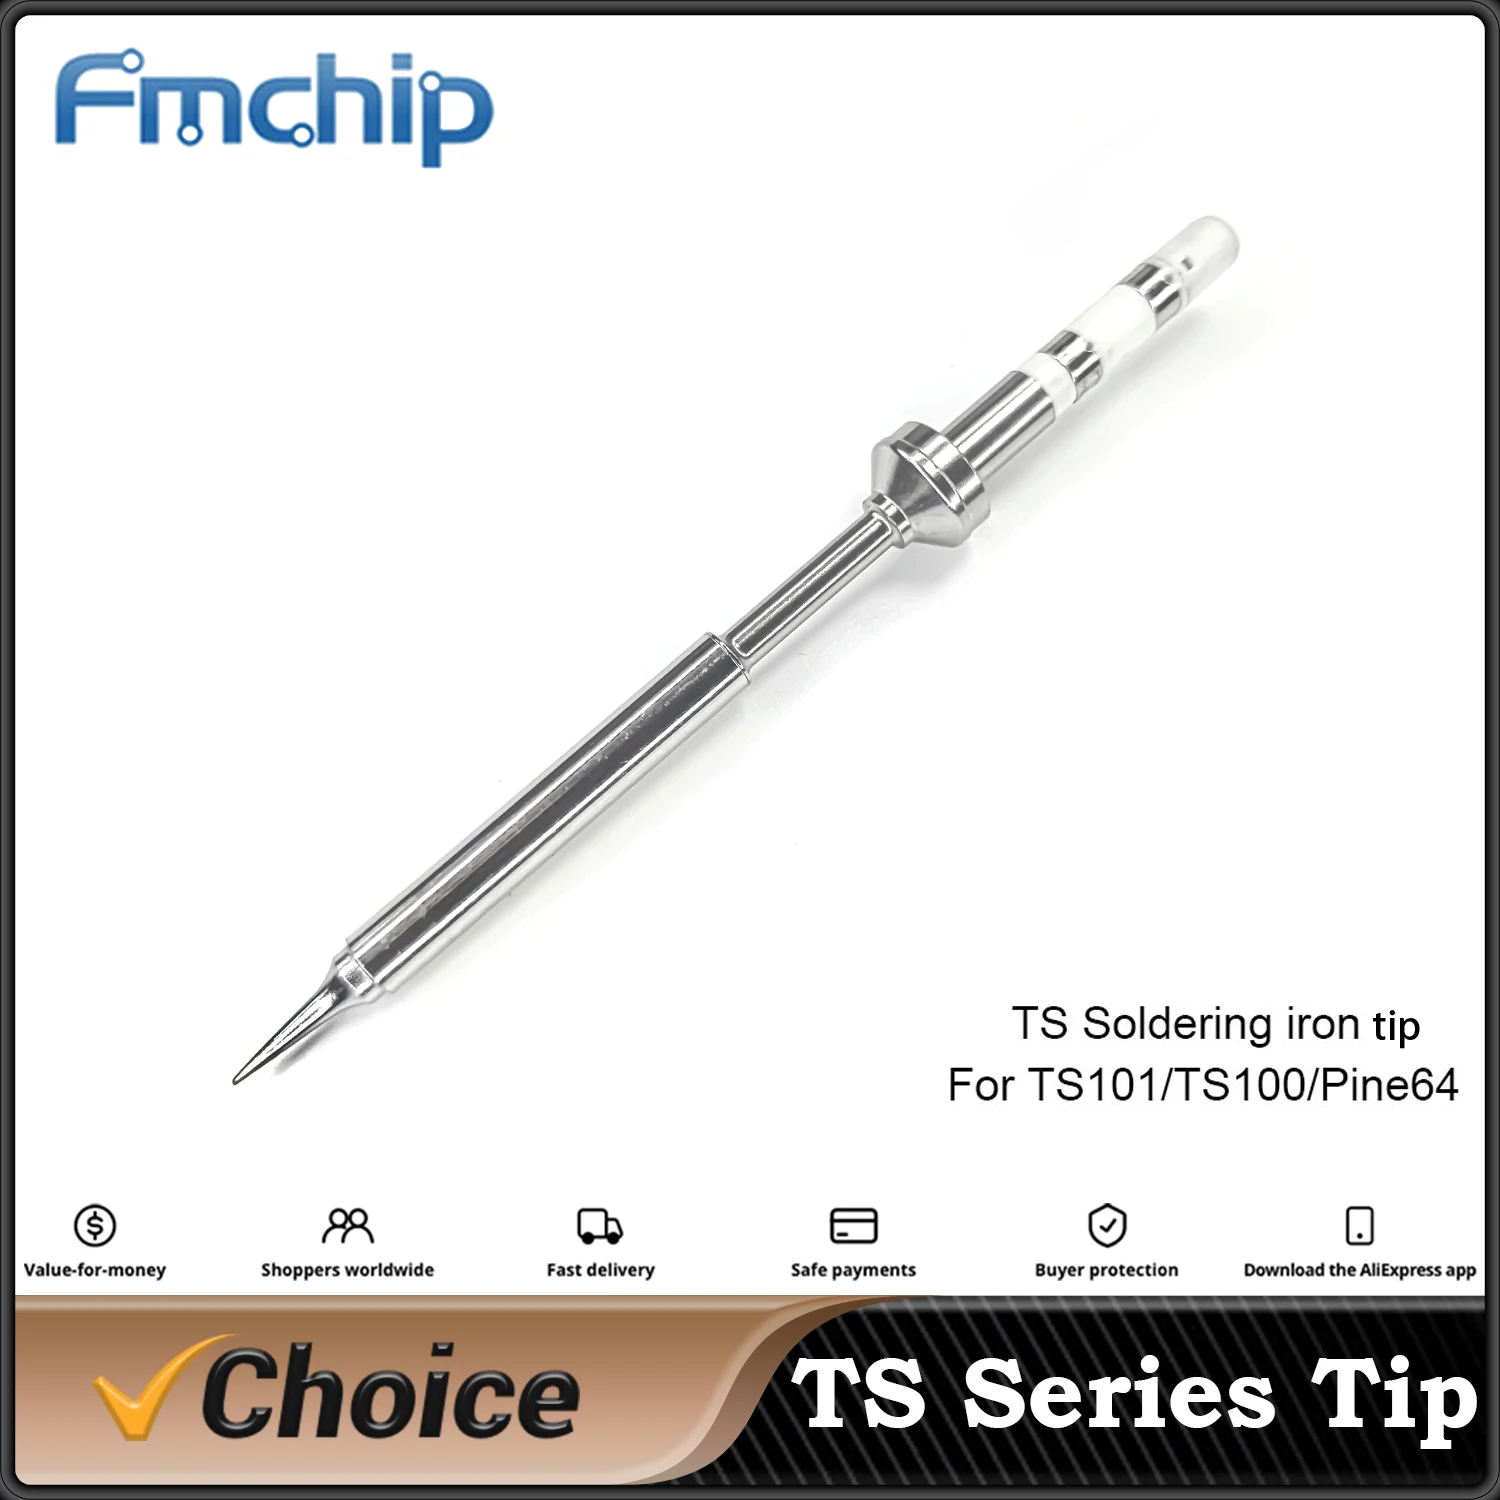 Pine64 TS100 ts101 Soldering Iron Tips Replacement Various Models of Pinecil V2 Electric Soldering Iron Tip TS Series BC2 ILS C4